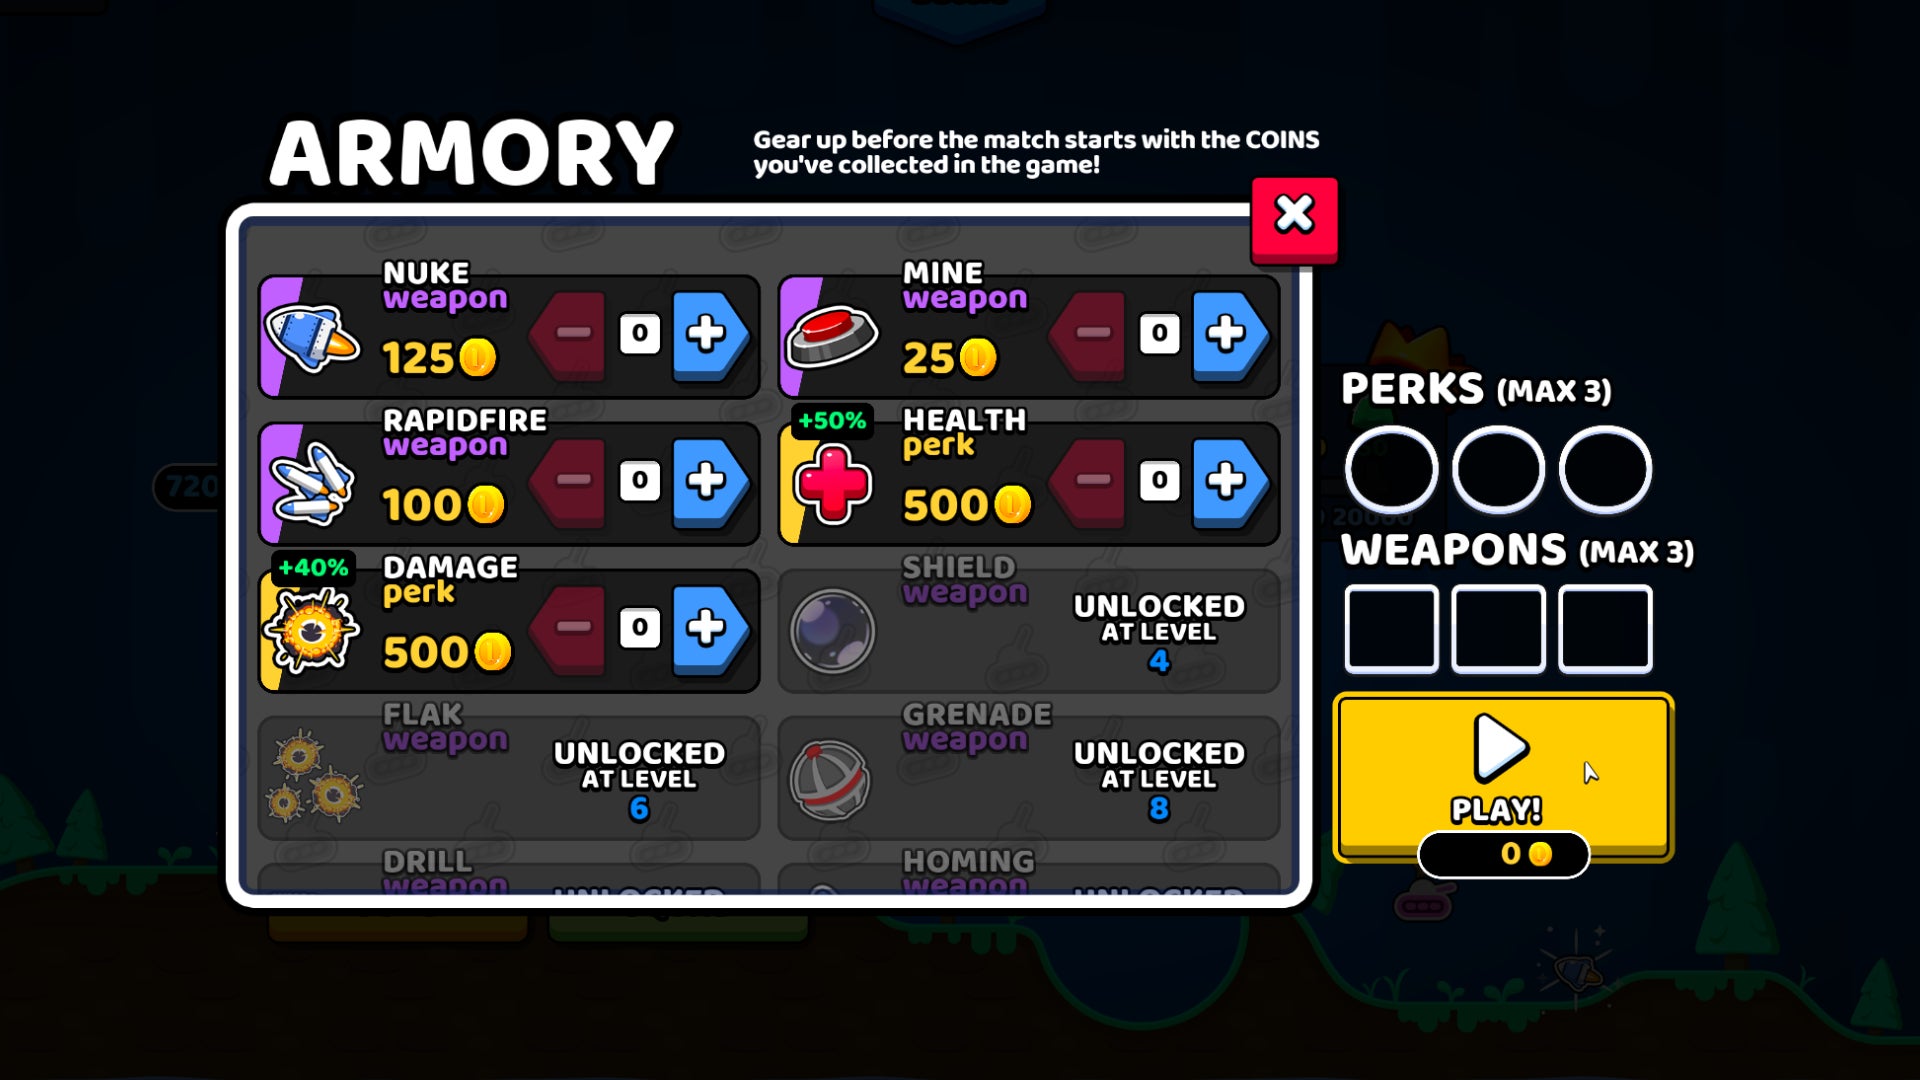 The armory screen of Rocket Bot Royale, showing which weapons and perks can be purchased for the upcoming match.